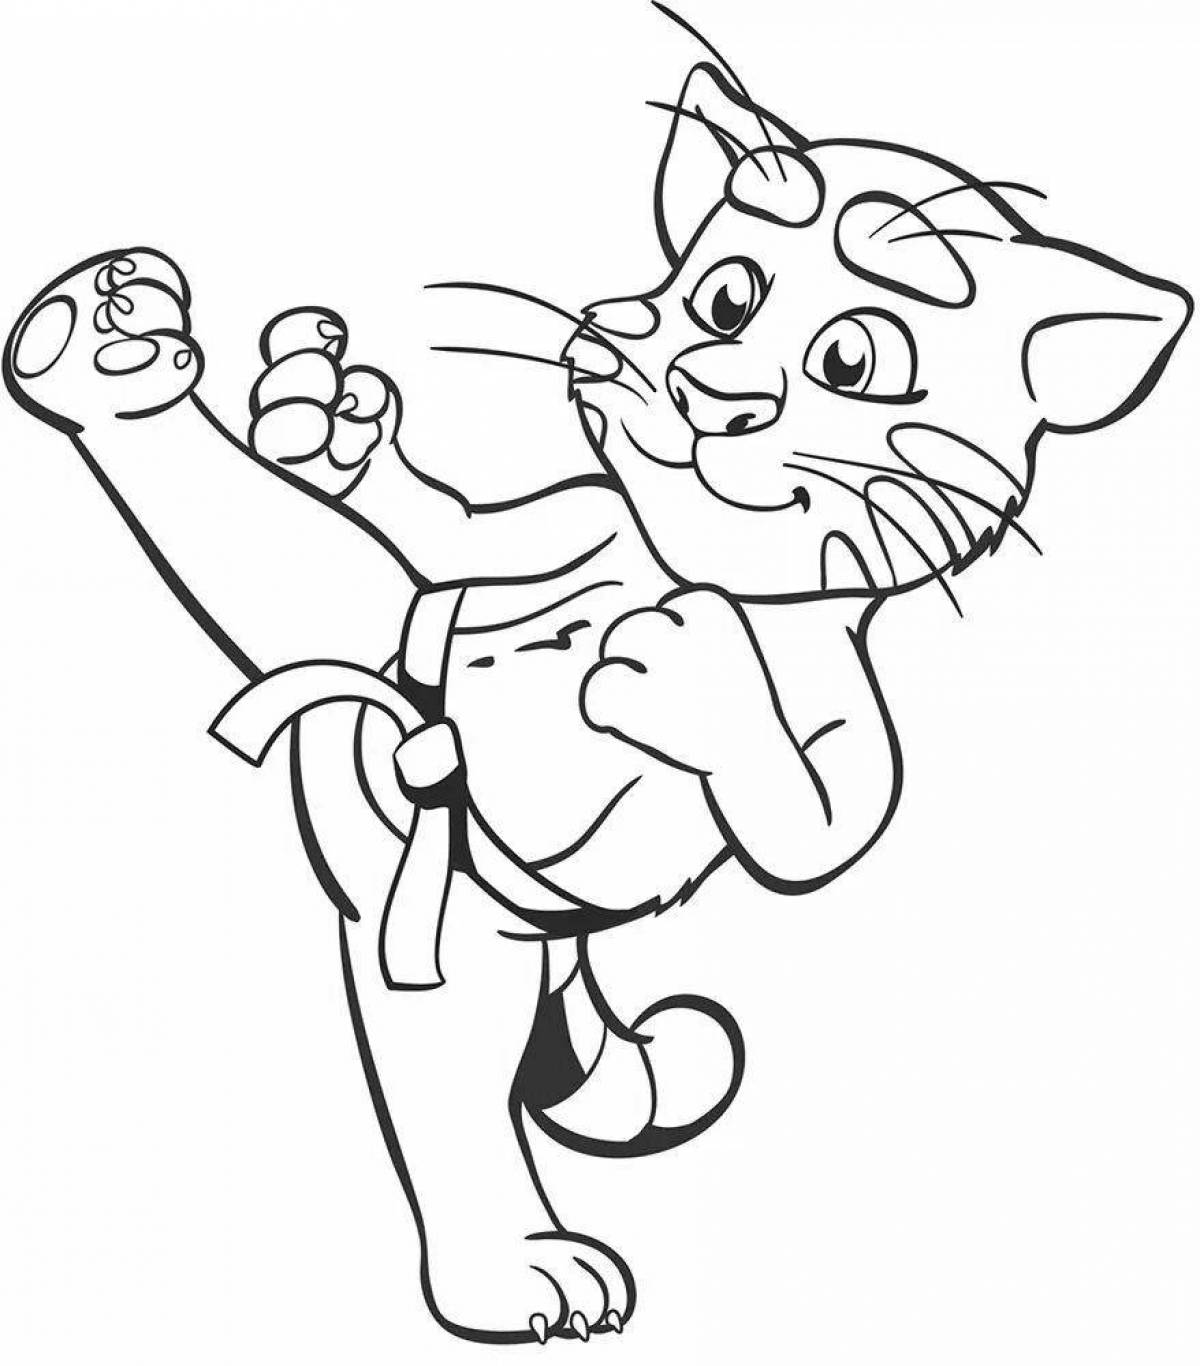 Cute cat coloring pages for boys